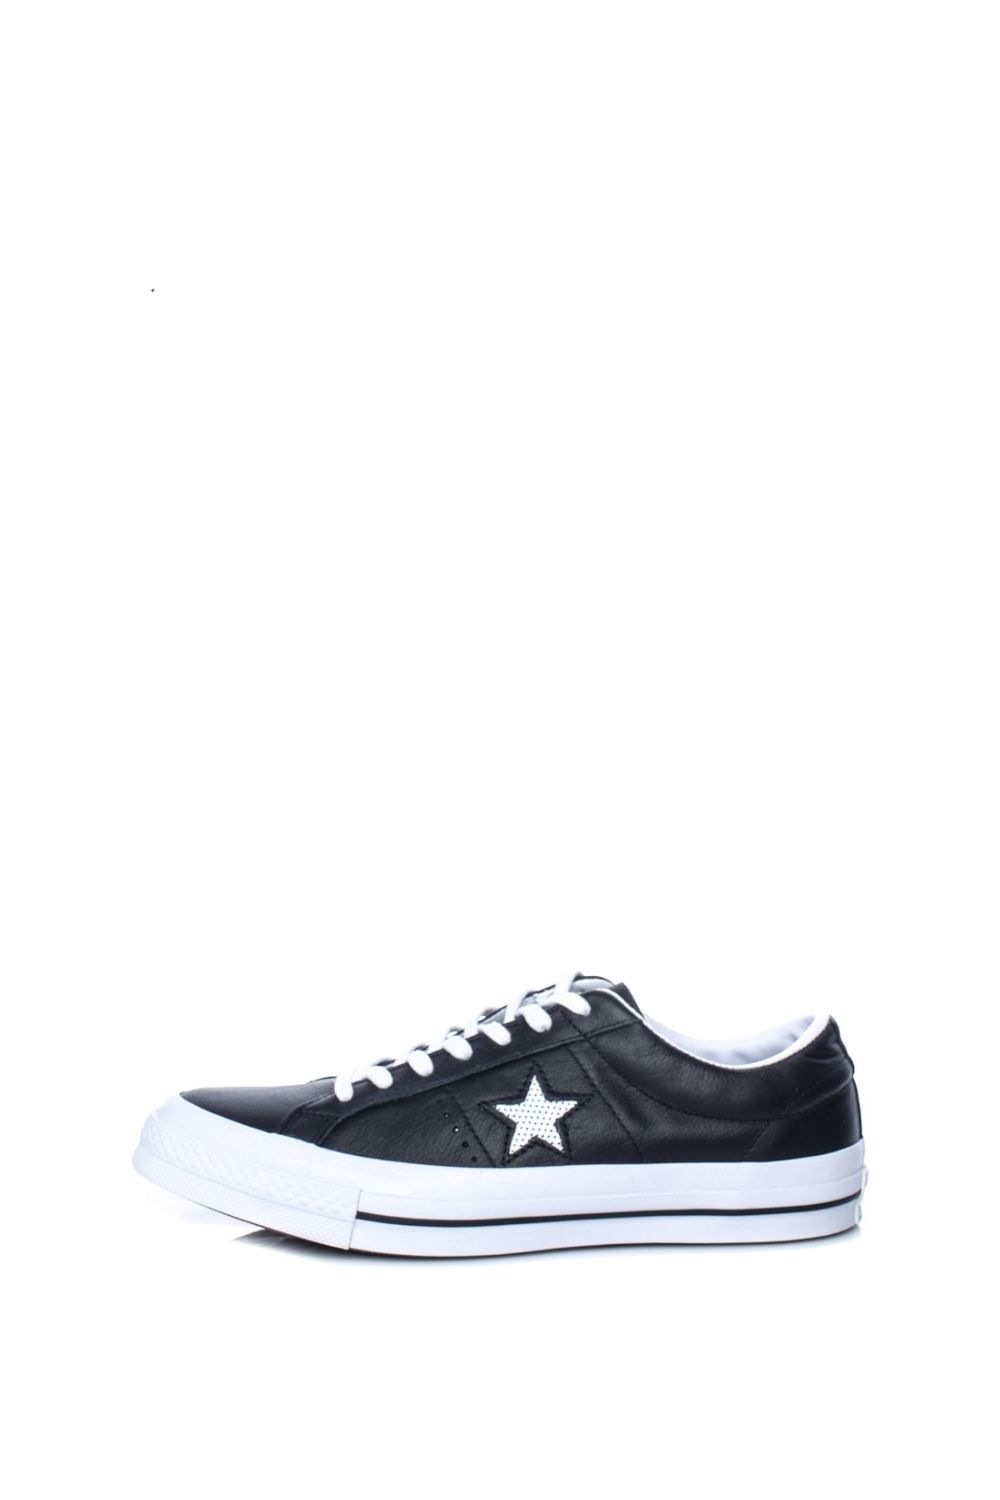 CONVERSE – Unisex sneakers CONVERSE One Star Ox ΥΠΟΔΗΜΑ μαύρα